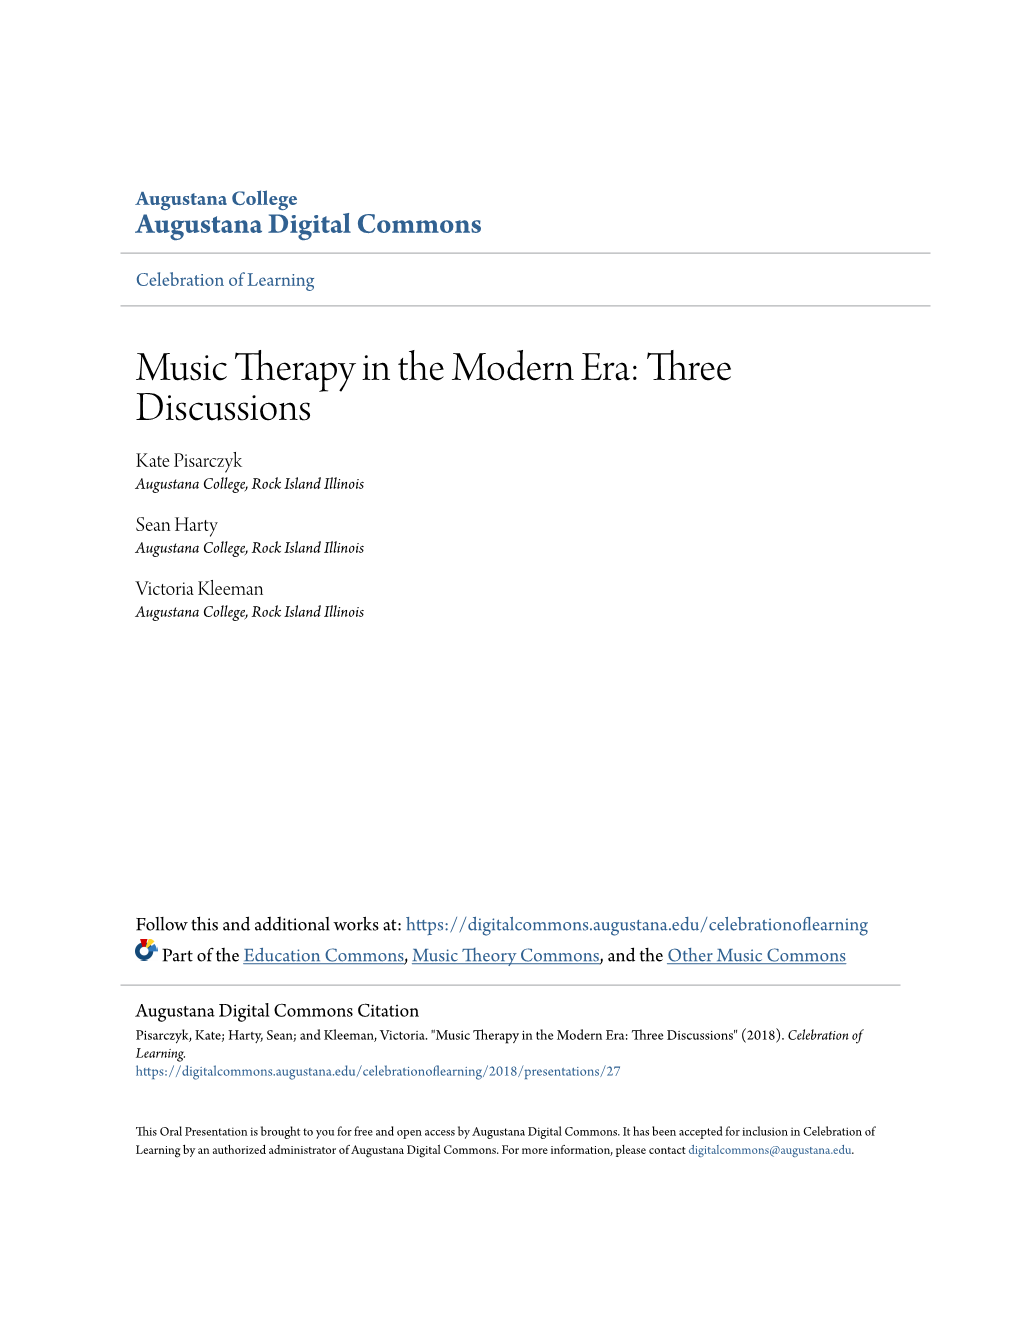 Music Therapy in the Modern Era: Three Discussions Kate Pisarczyk Augustana College, Rock Island Illinois